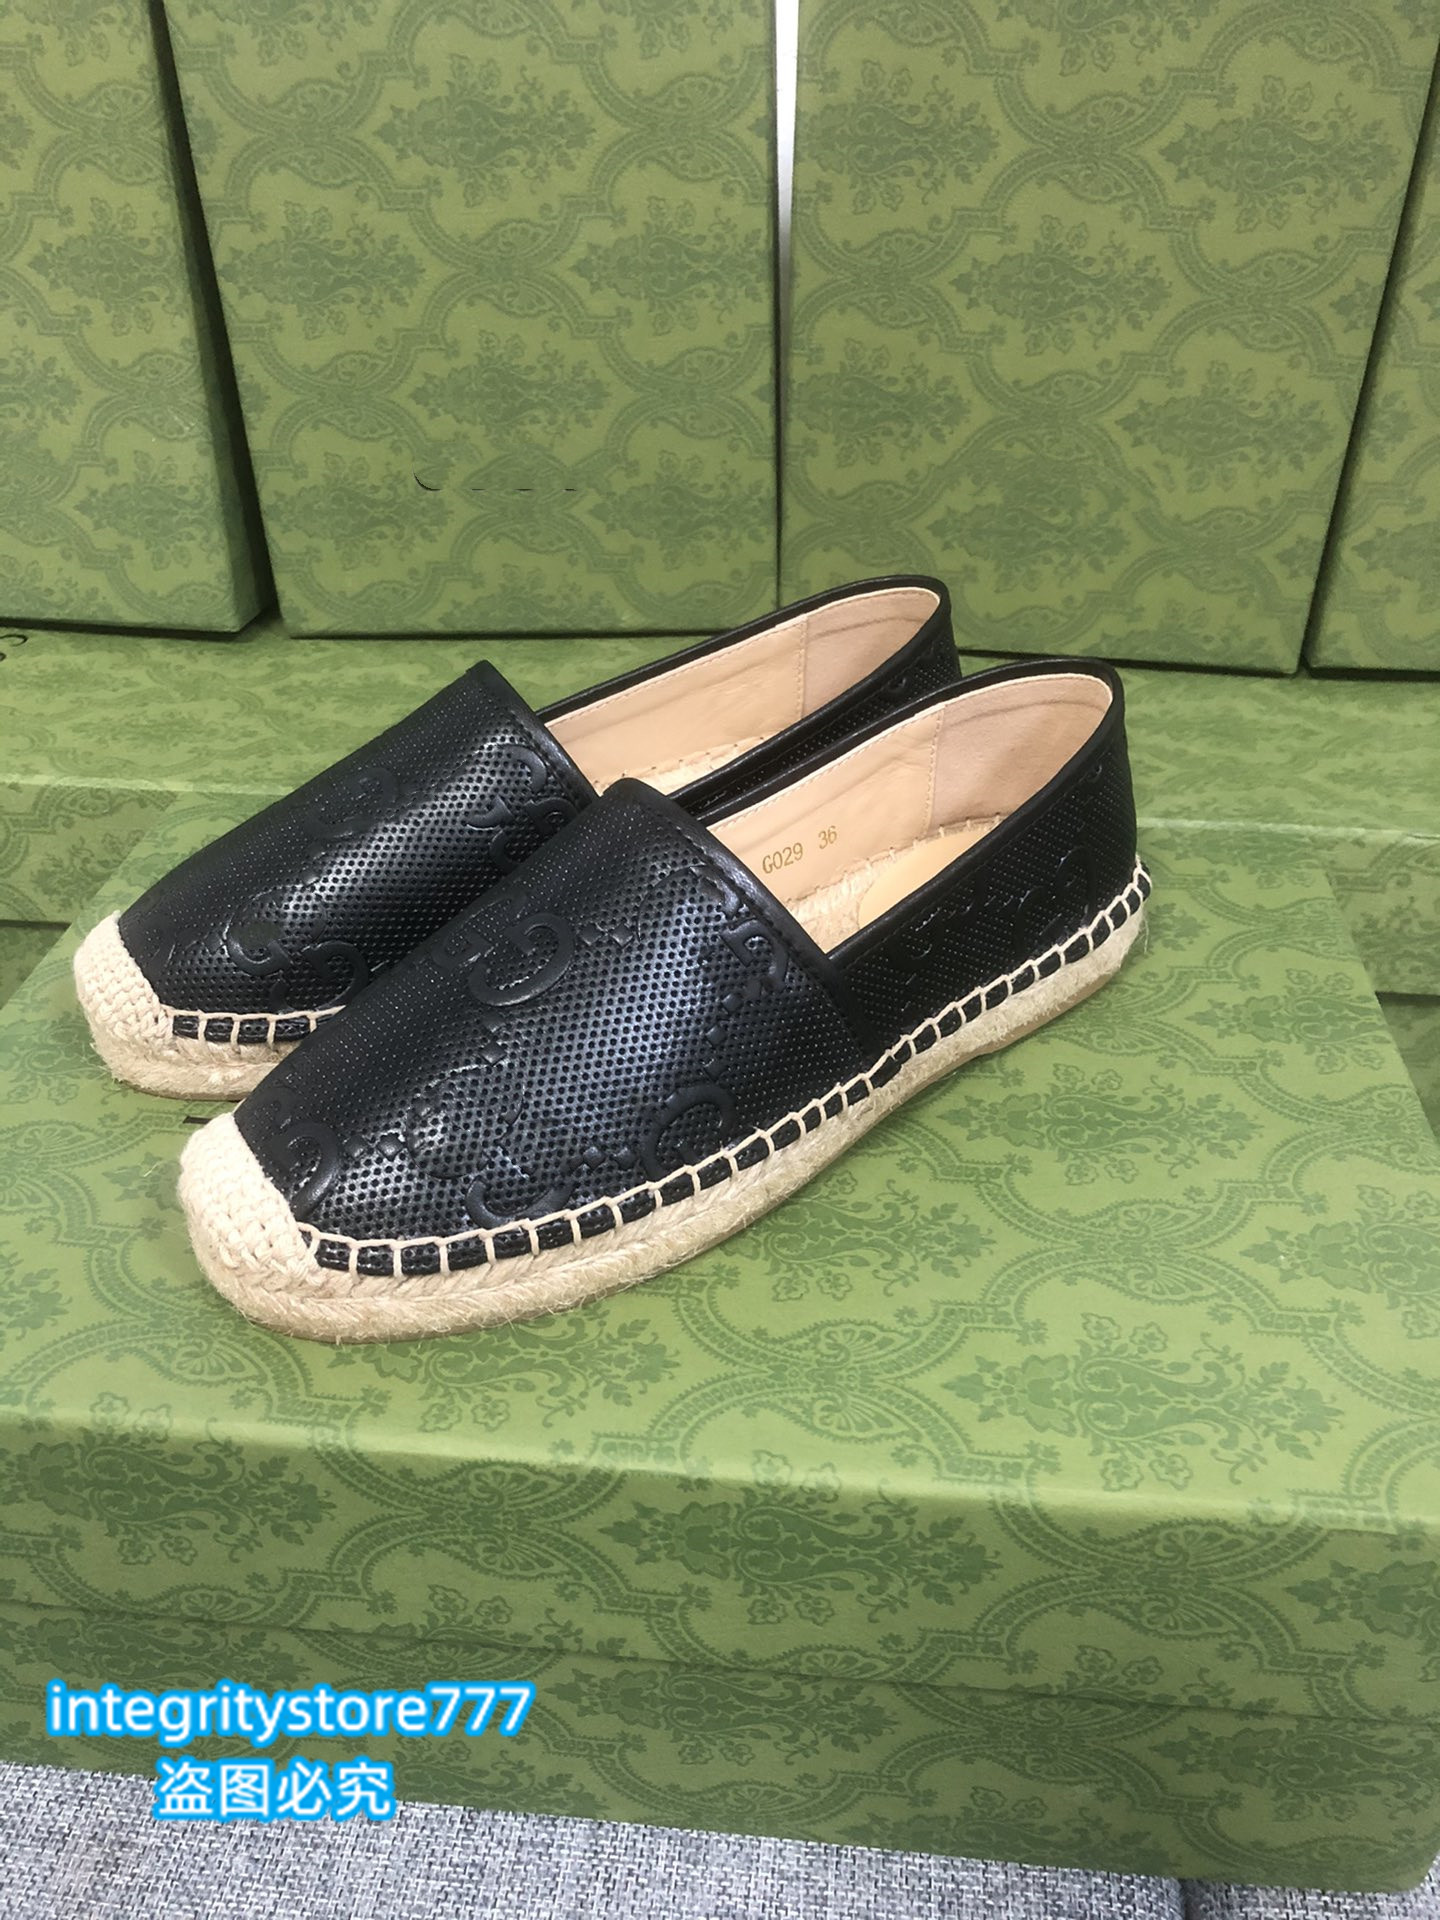 

X75 2022 NEW Women jacquard espadrille Designer Flat Shoes Leather Espadrilles Loafers Canvas Fashion Lady Girls White Calfskin Casual Shoes WIth logo size 35-41, Only box(no shoes)